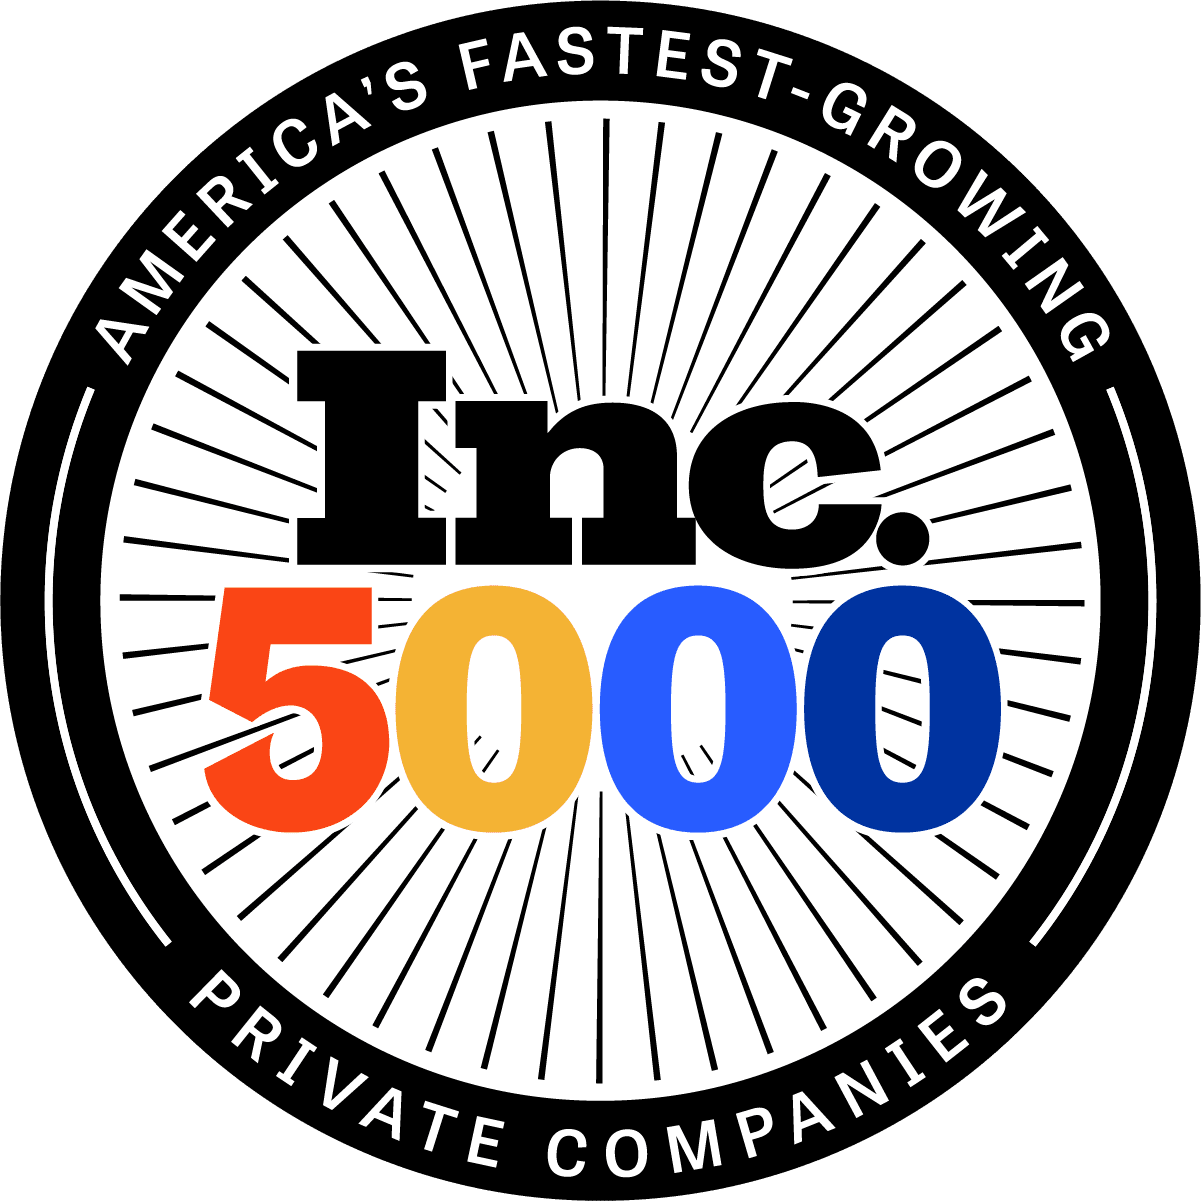 One of America's Fastest Growing Companies